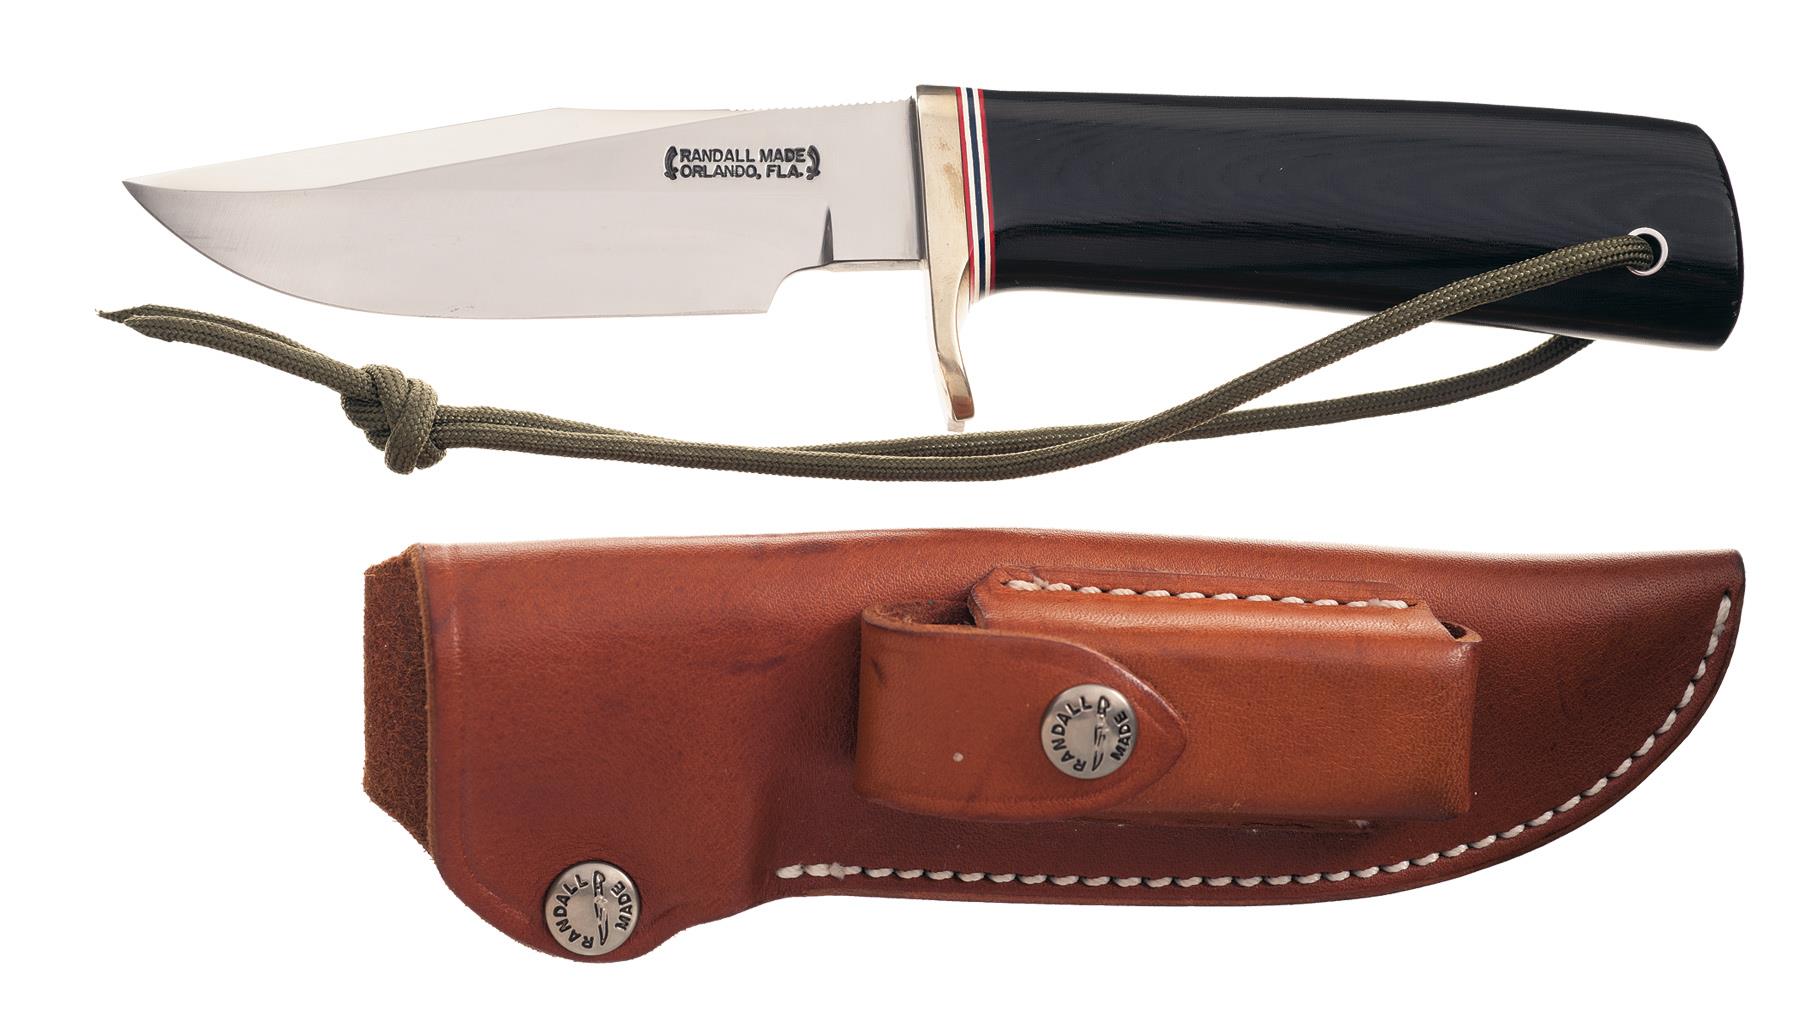 Randall Model 8-4 Old Style Trout and Bird Knife with Sheath